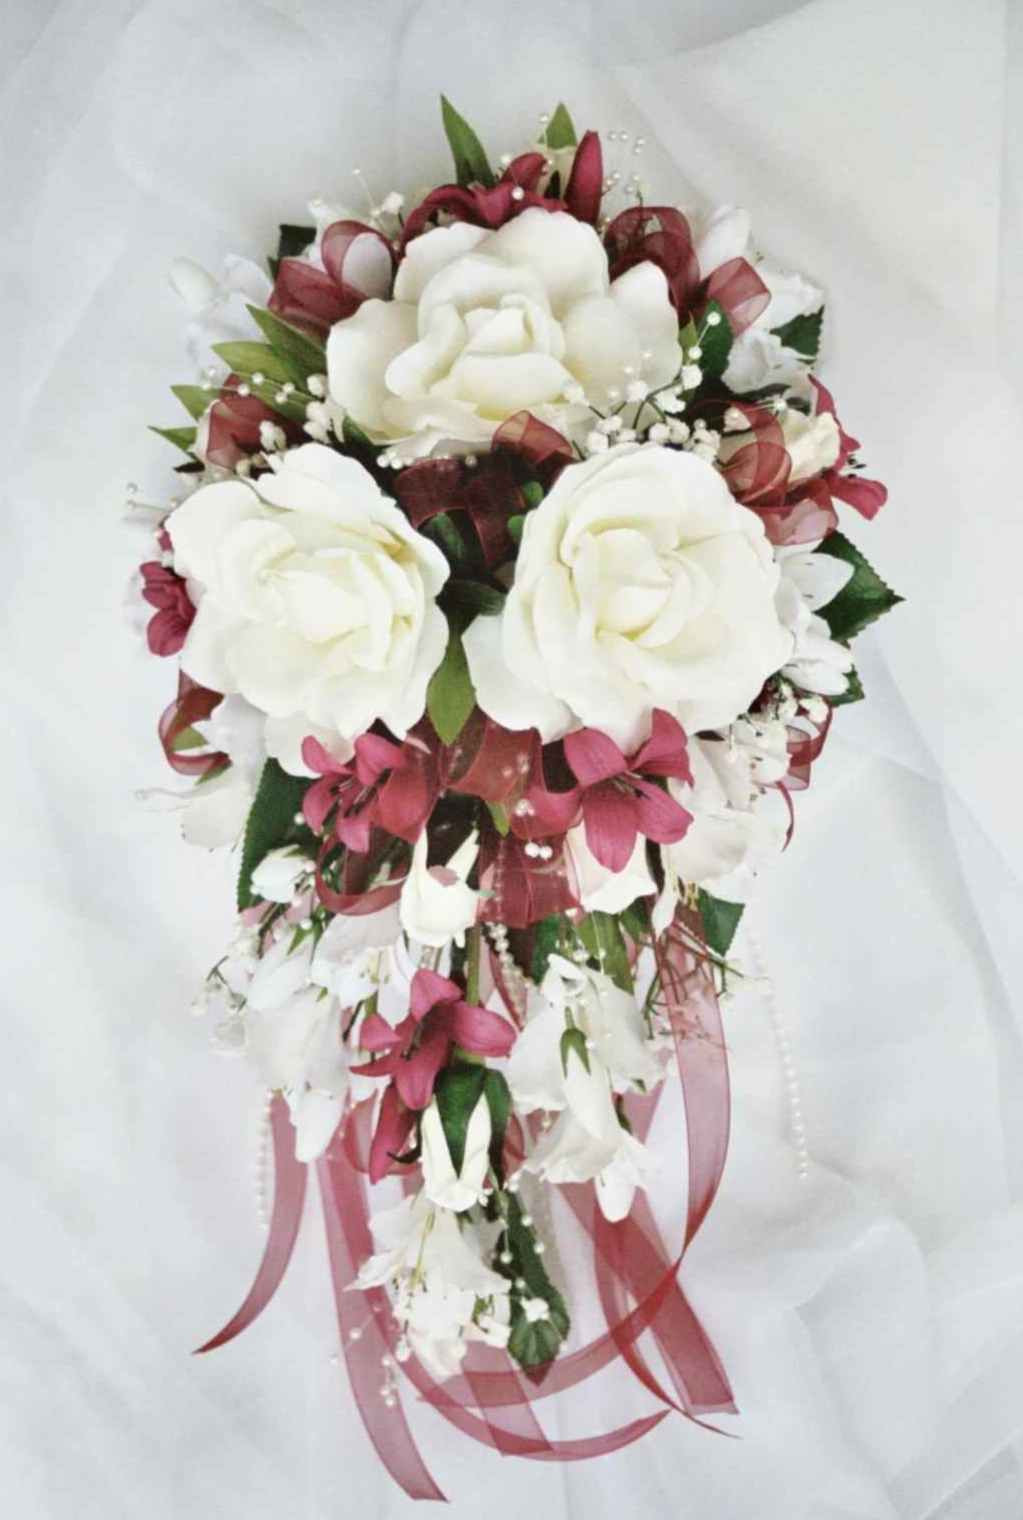 Wedding Flowers Ideas
 about marriage marriage flower bouquet 2013